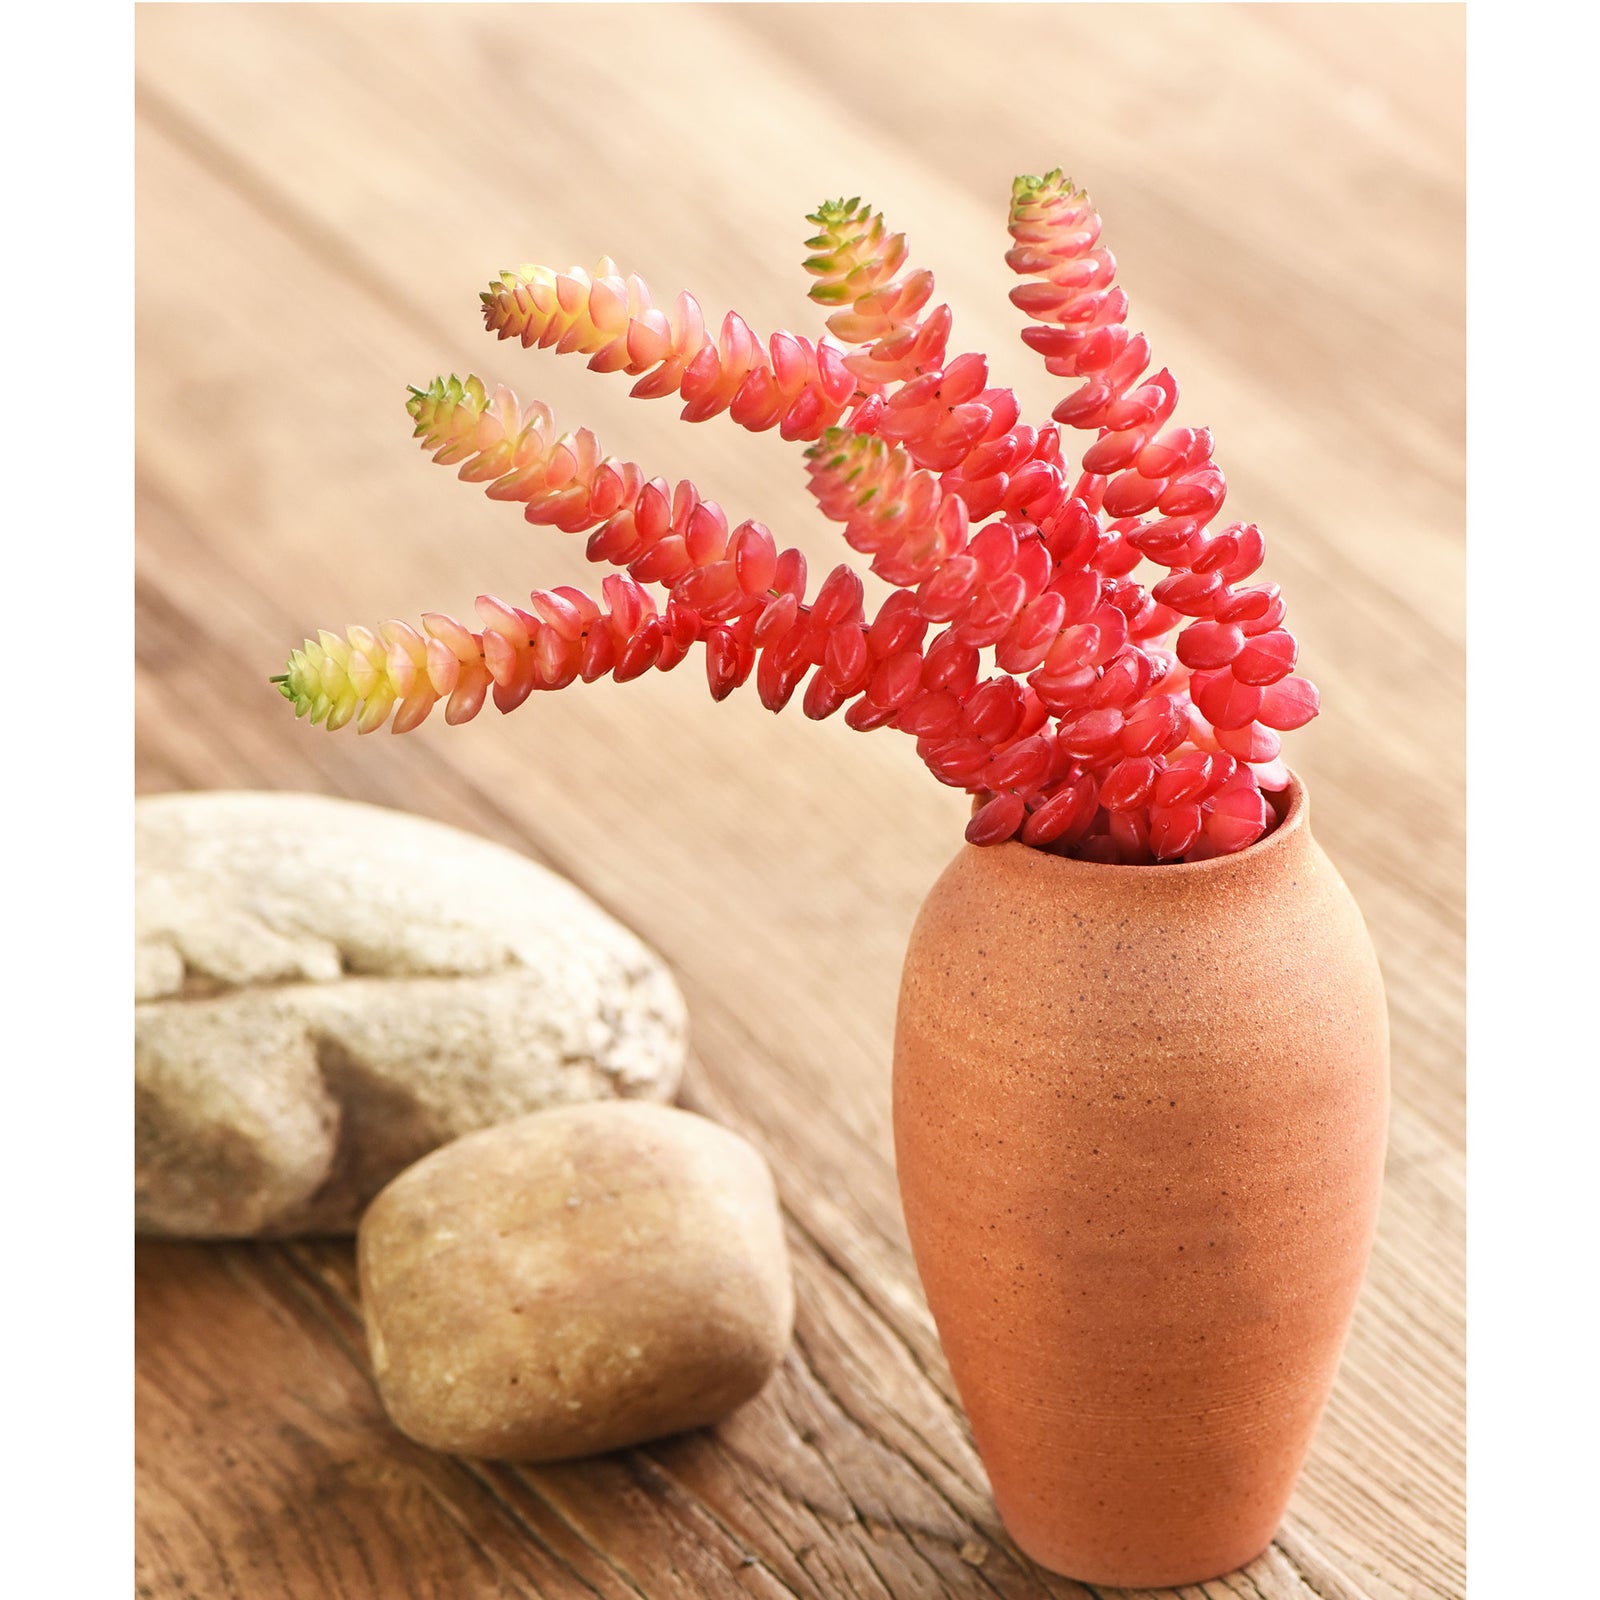 2 Stems Realistic-Looking Artificial/Faux/Fake Succulent Unpotted Plant Bulk for Decoration, Gifts, DIY (Red)